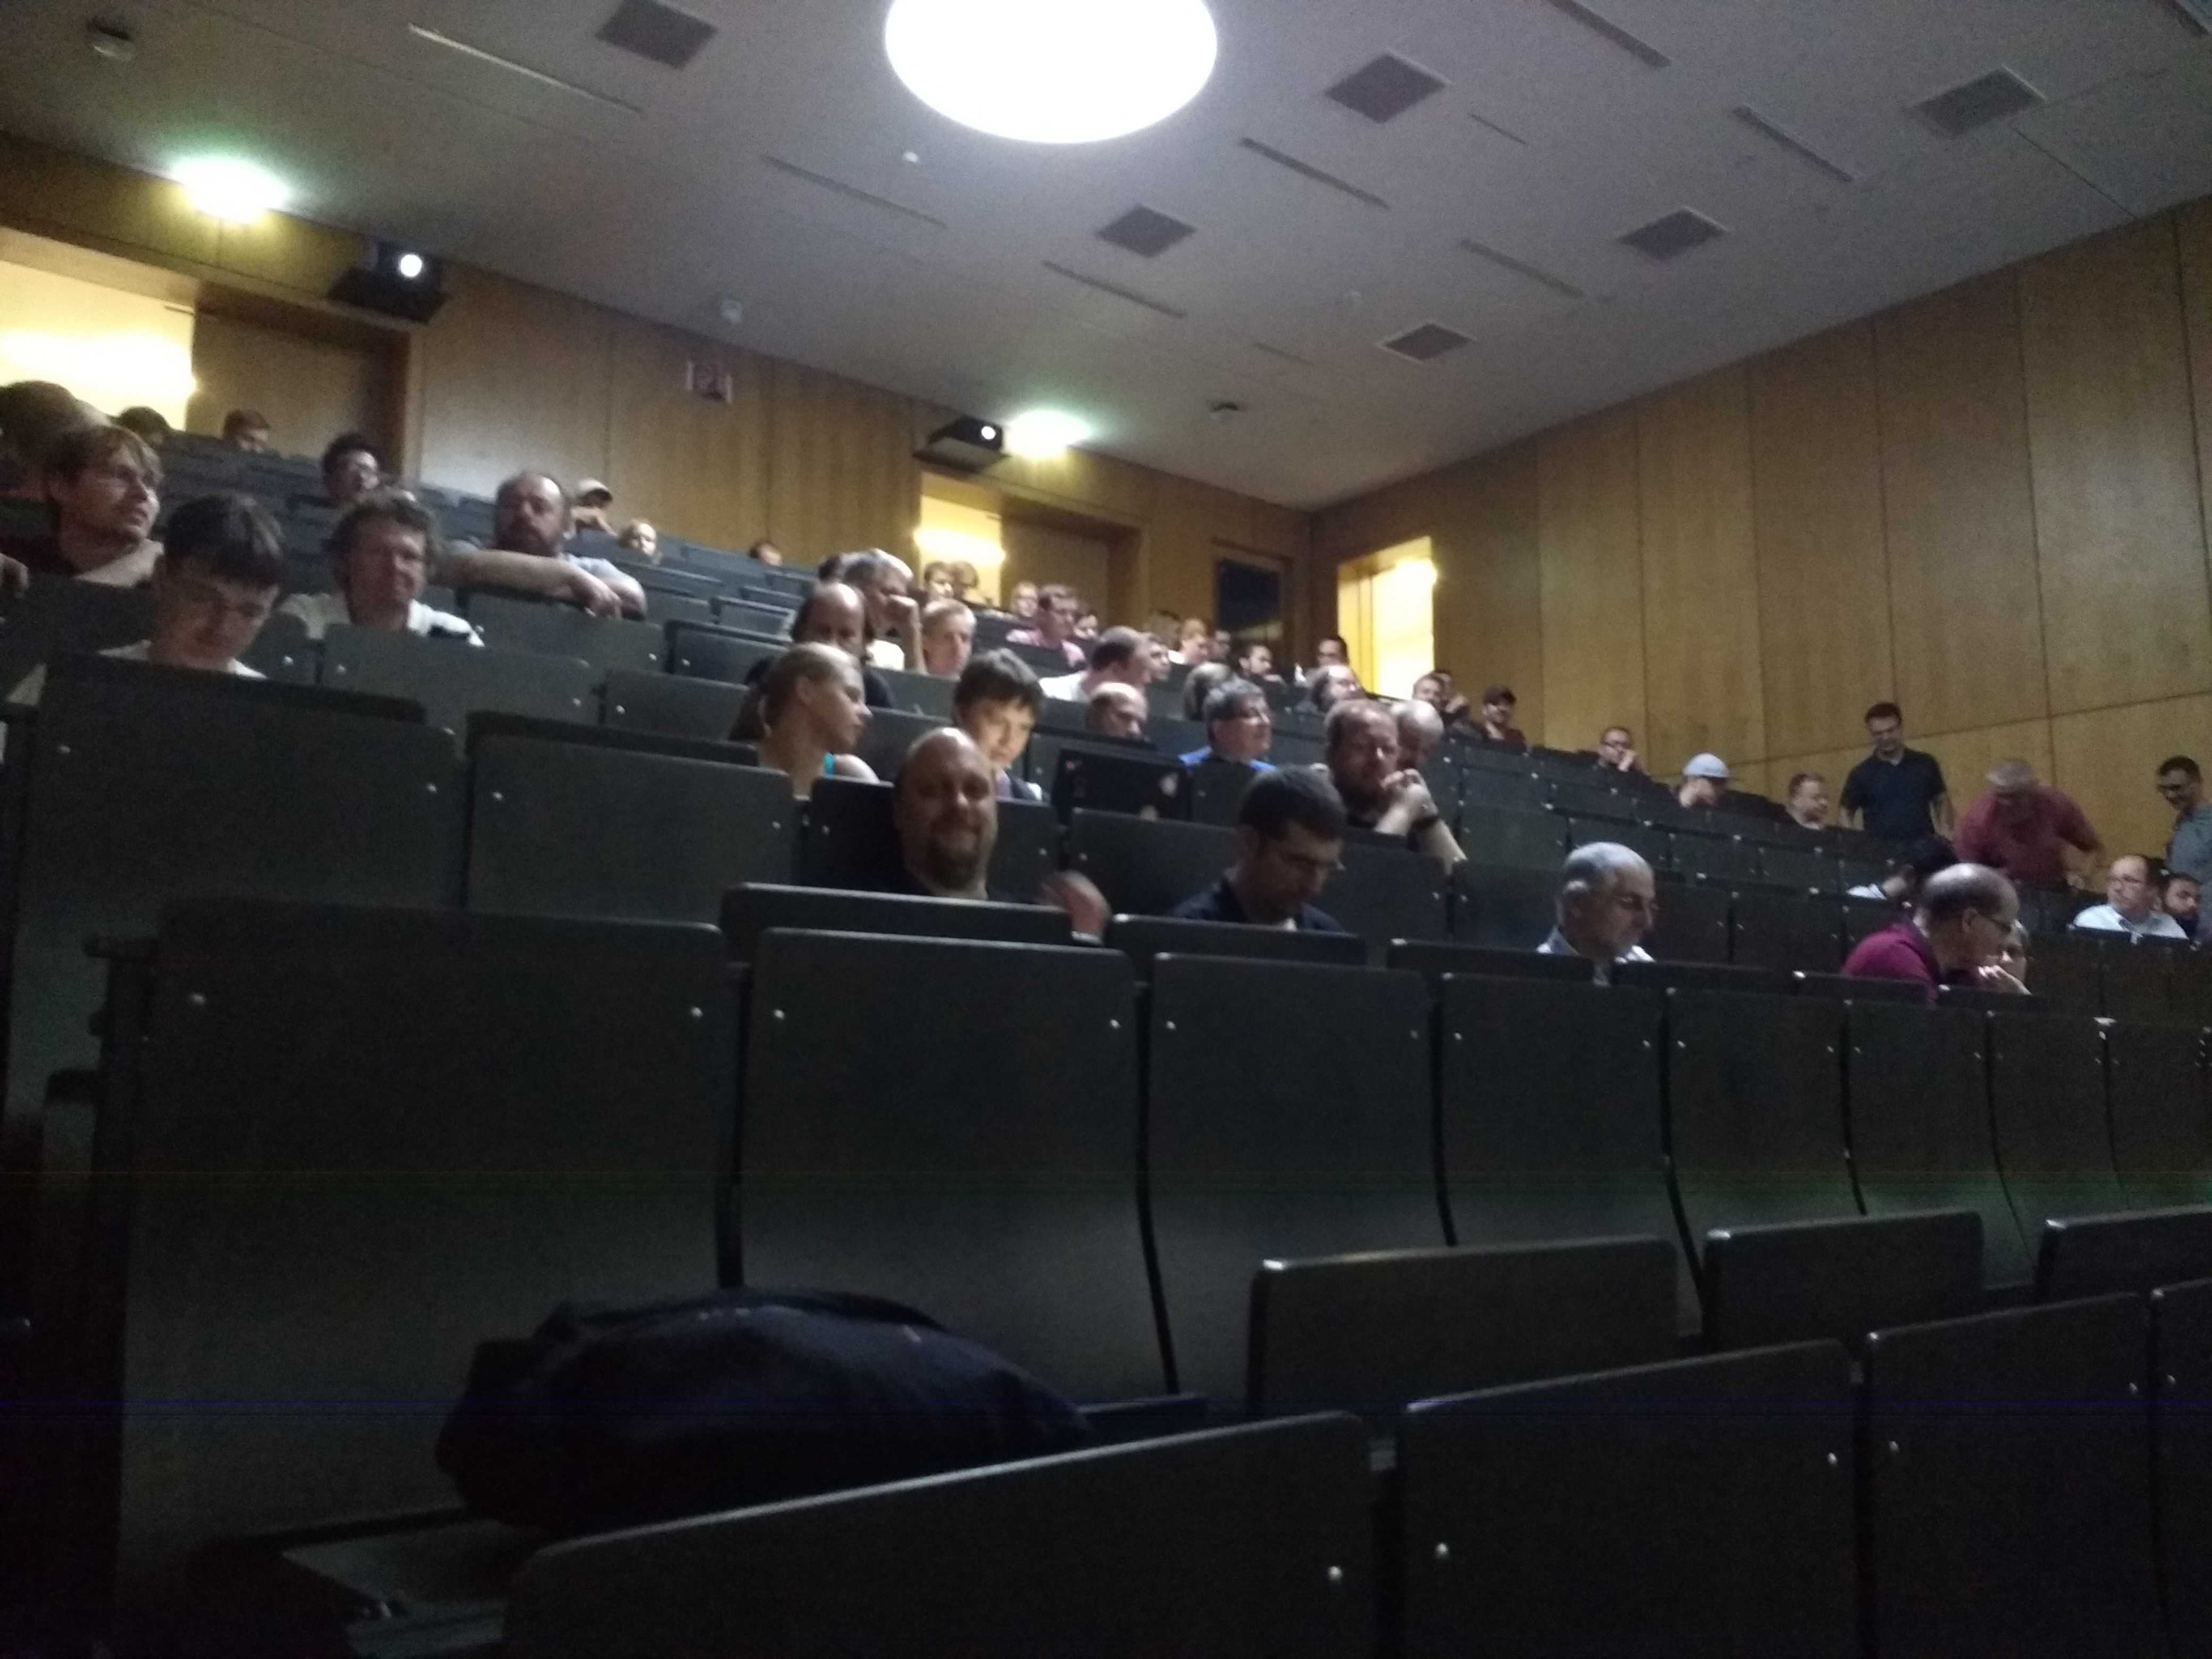 Audience, 10 minutes before the talk